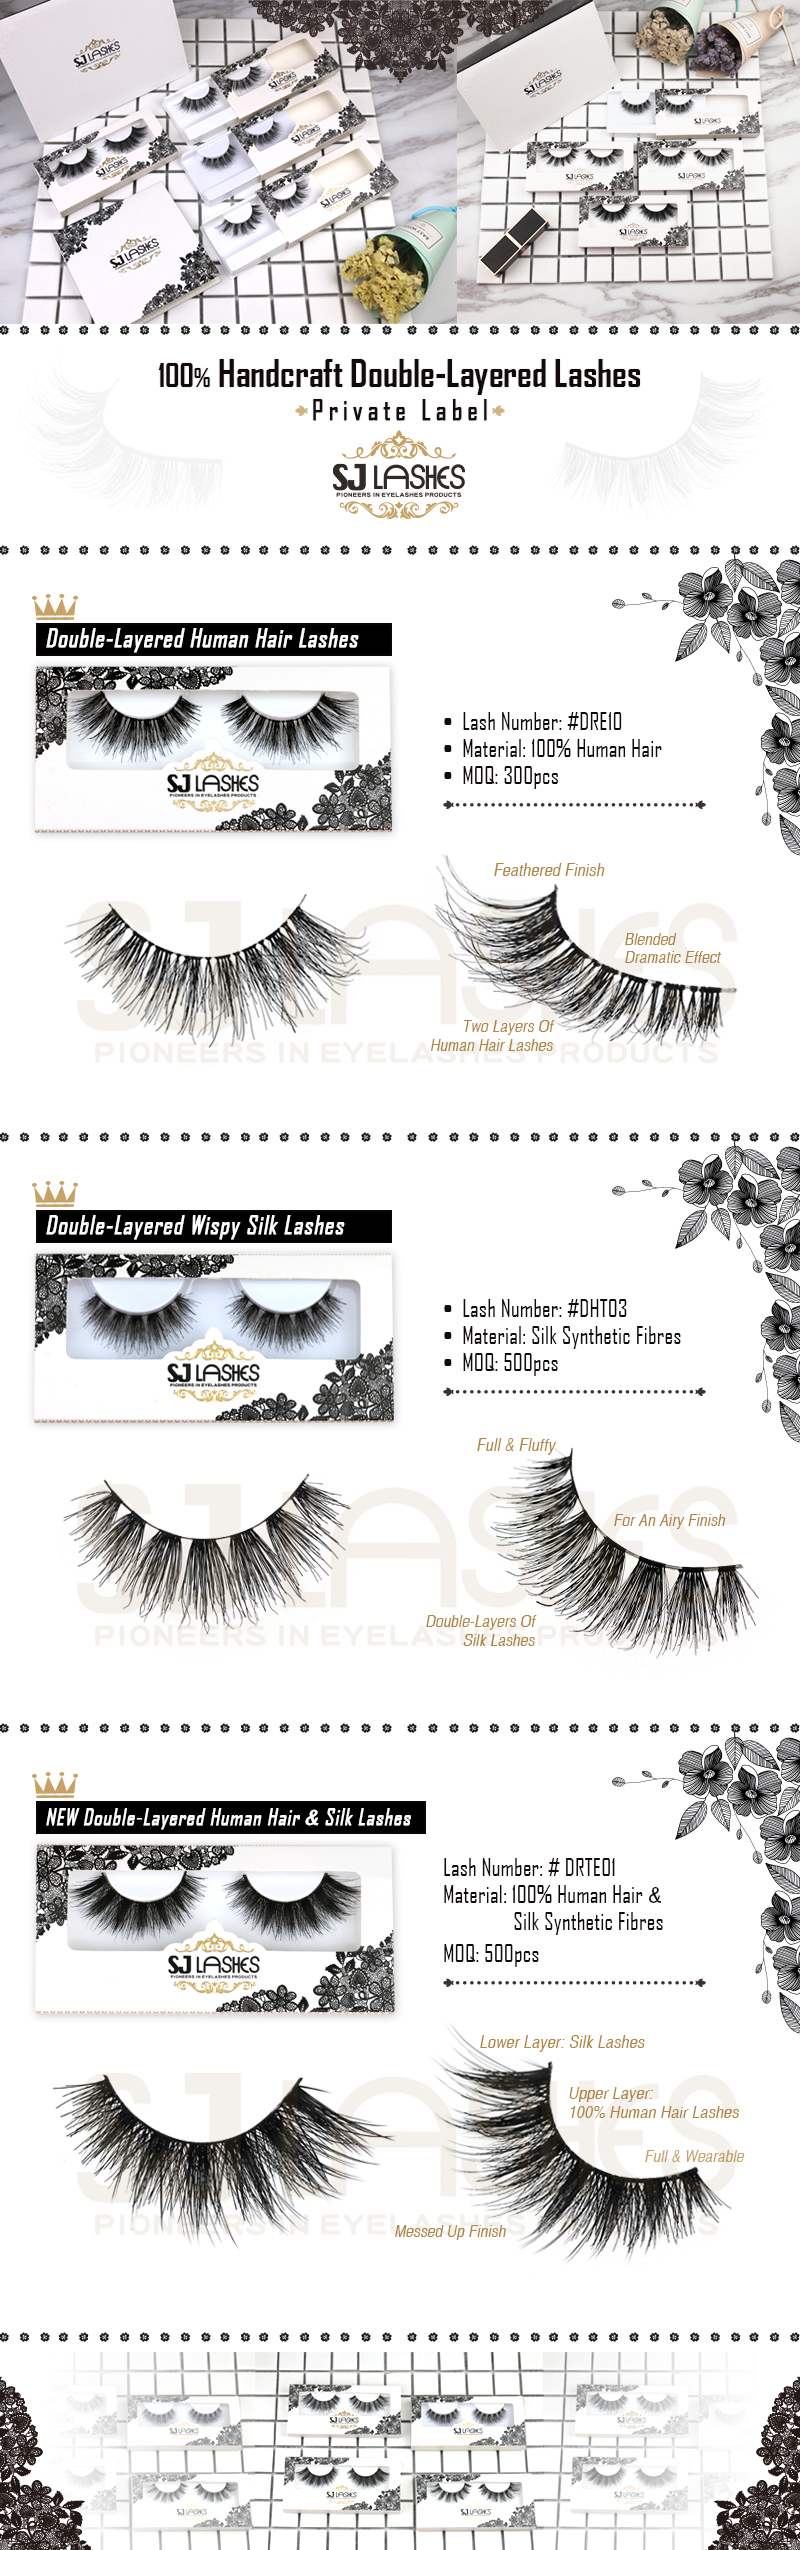 Double-Layered Lashes.jpg